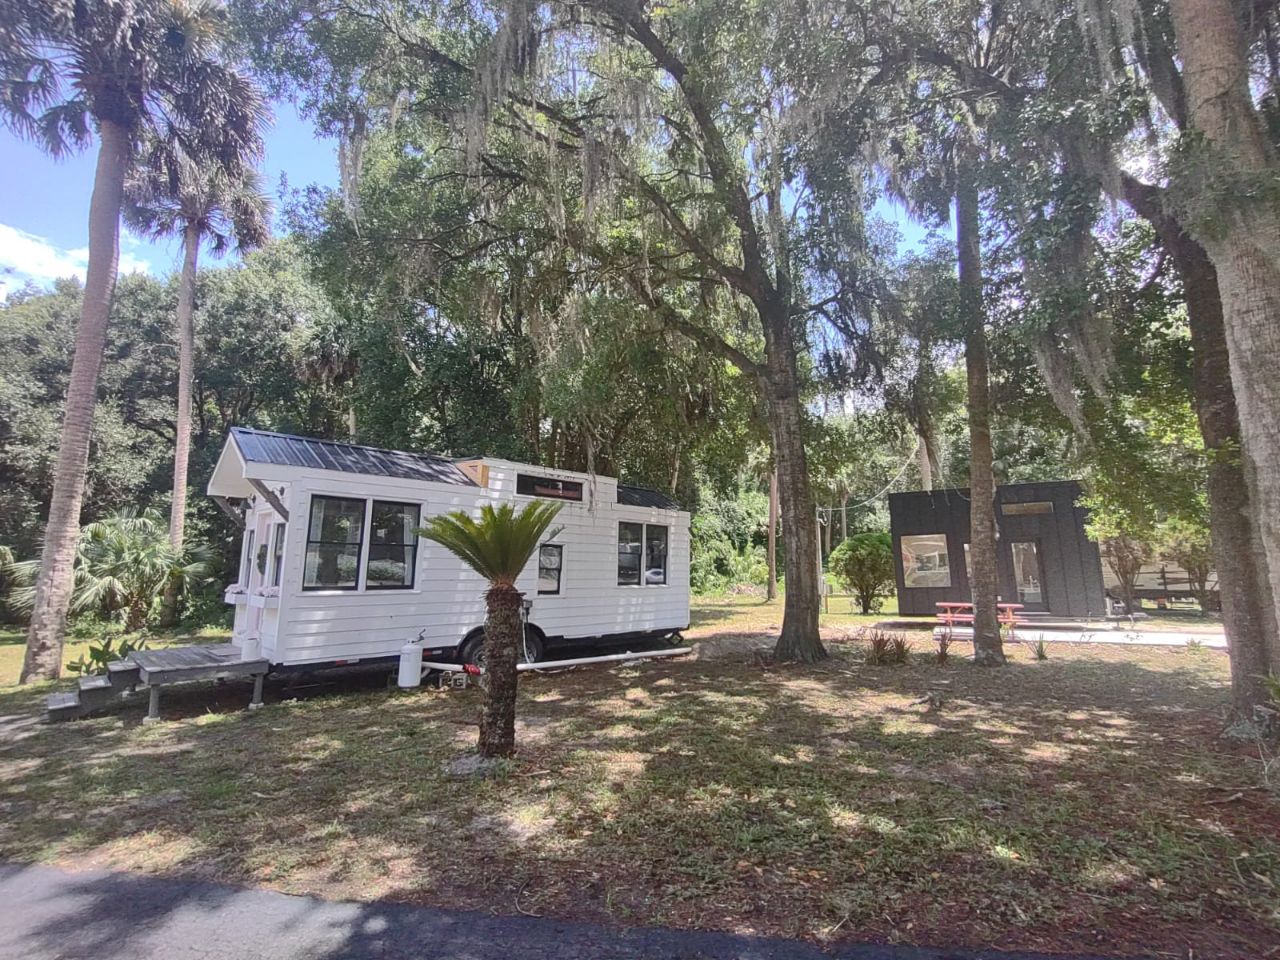 We Are A Growing Tiny House Community - Bring Your Tiny House To Citra Royal Palm RV Park